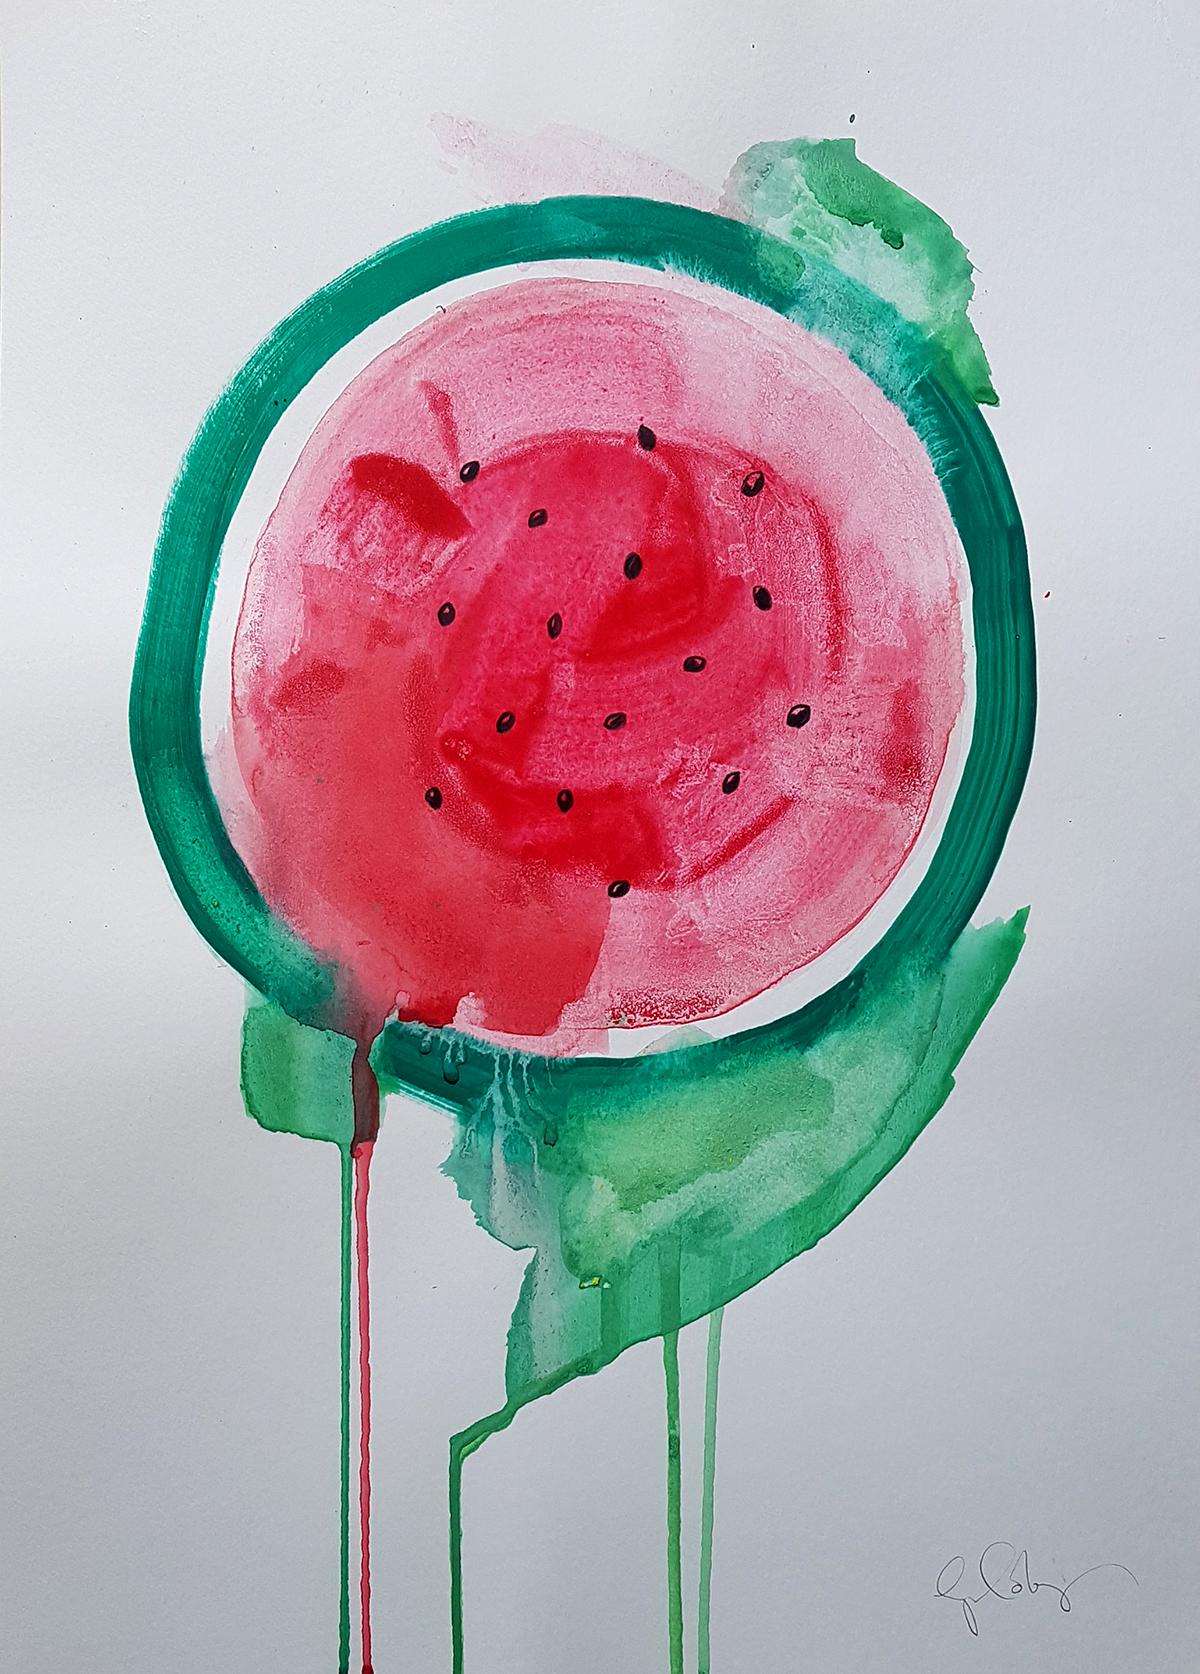 Watermelon and Cactus Painting Diptych - Contemporary Art by Gavin Dobson